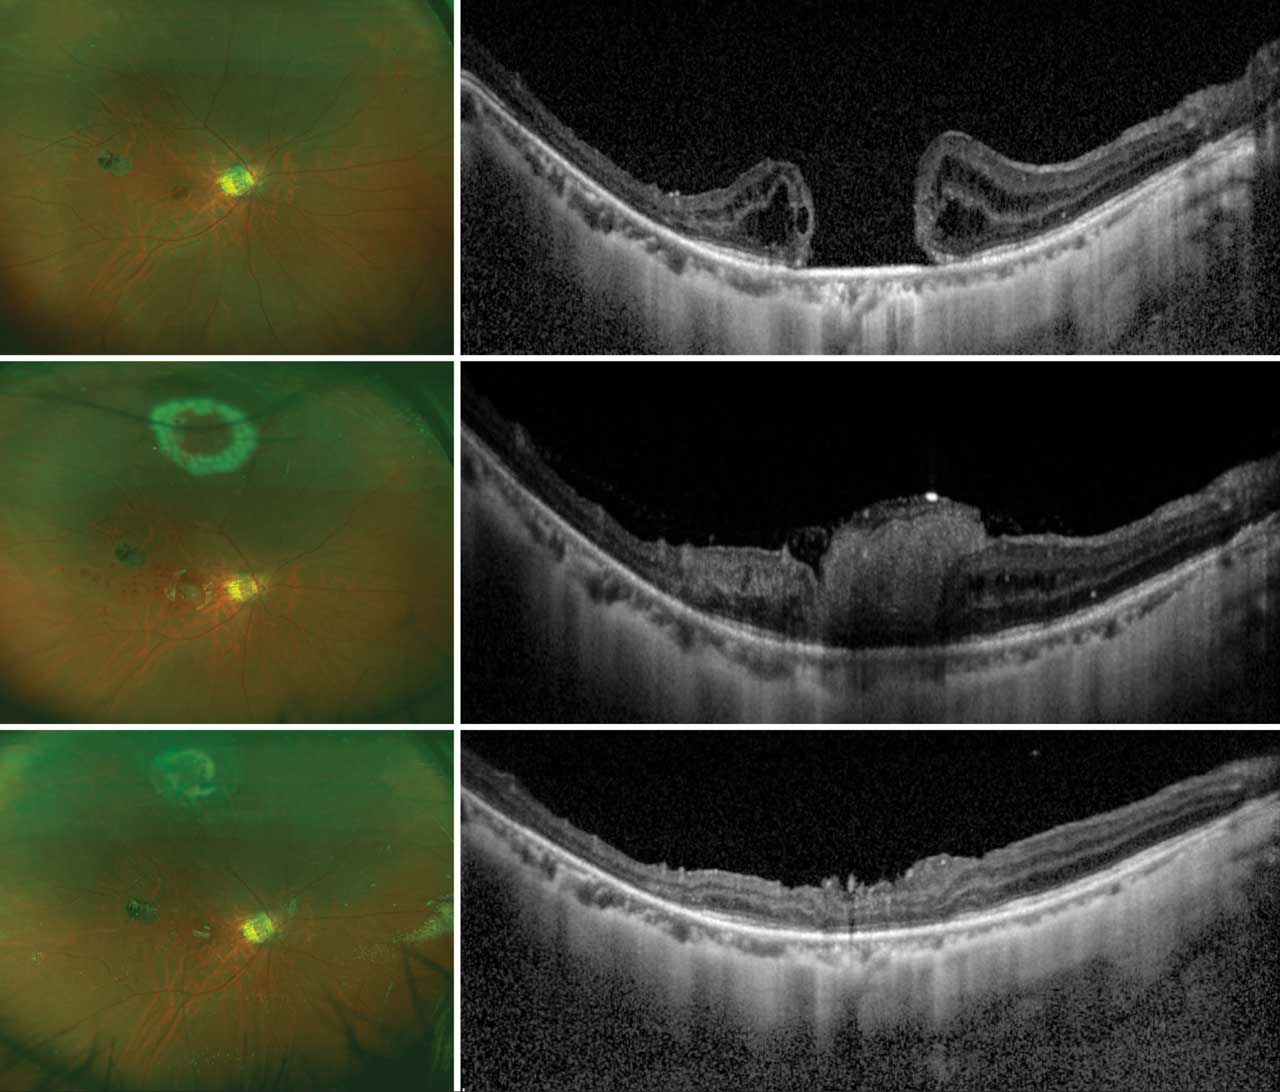 Figure 1. Anatomic closure following autologous retinal transplant. Preoperative image (A) of the large refractory myopic macular hole. Postoperative week 1 image (B) with hole closure, reconstitution of the ellipsoid zone, and alignment of the neurosensory layers between grafted peripheral retina and macular tissue.